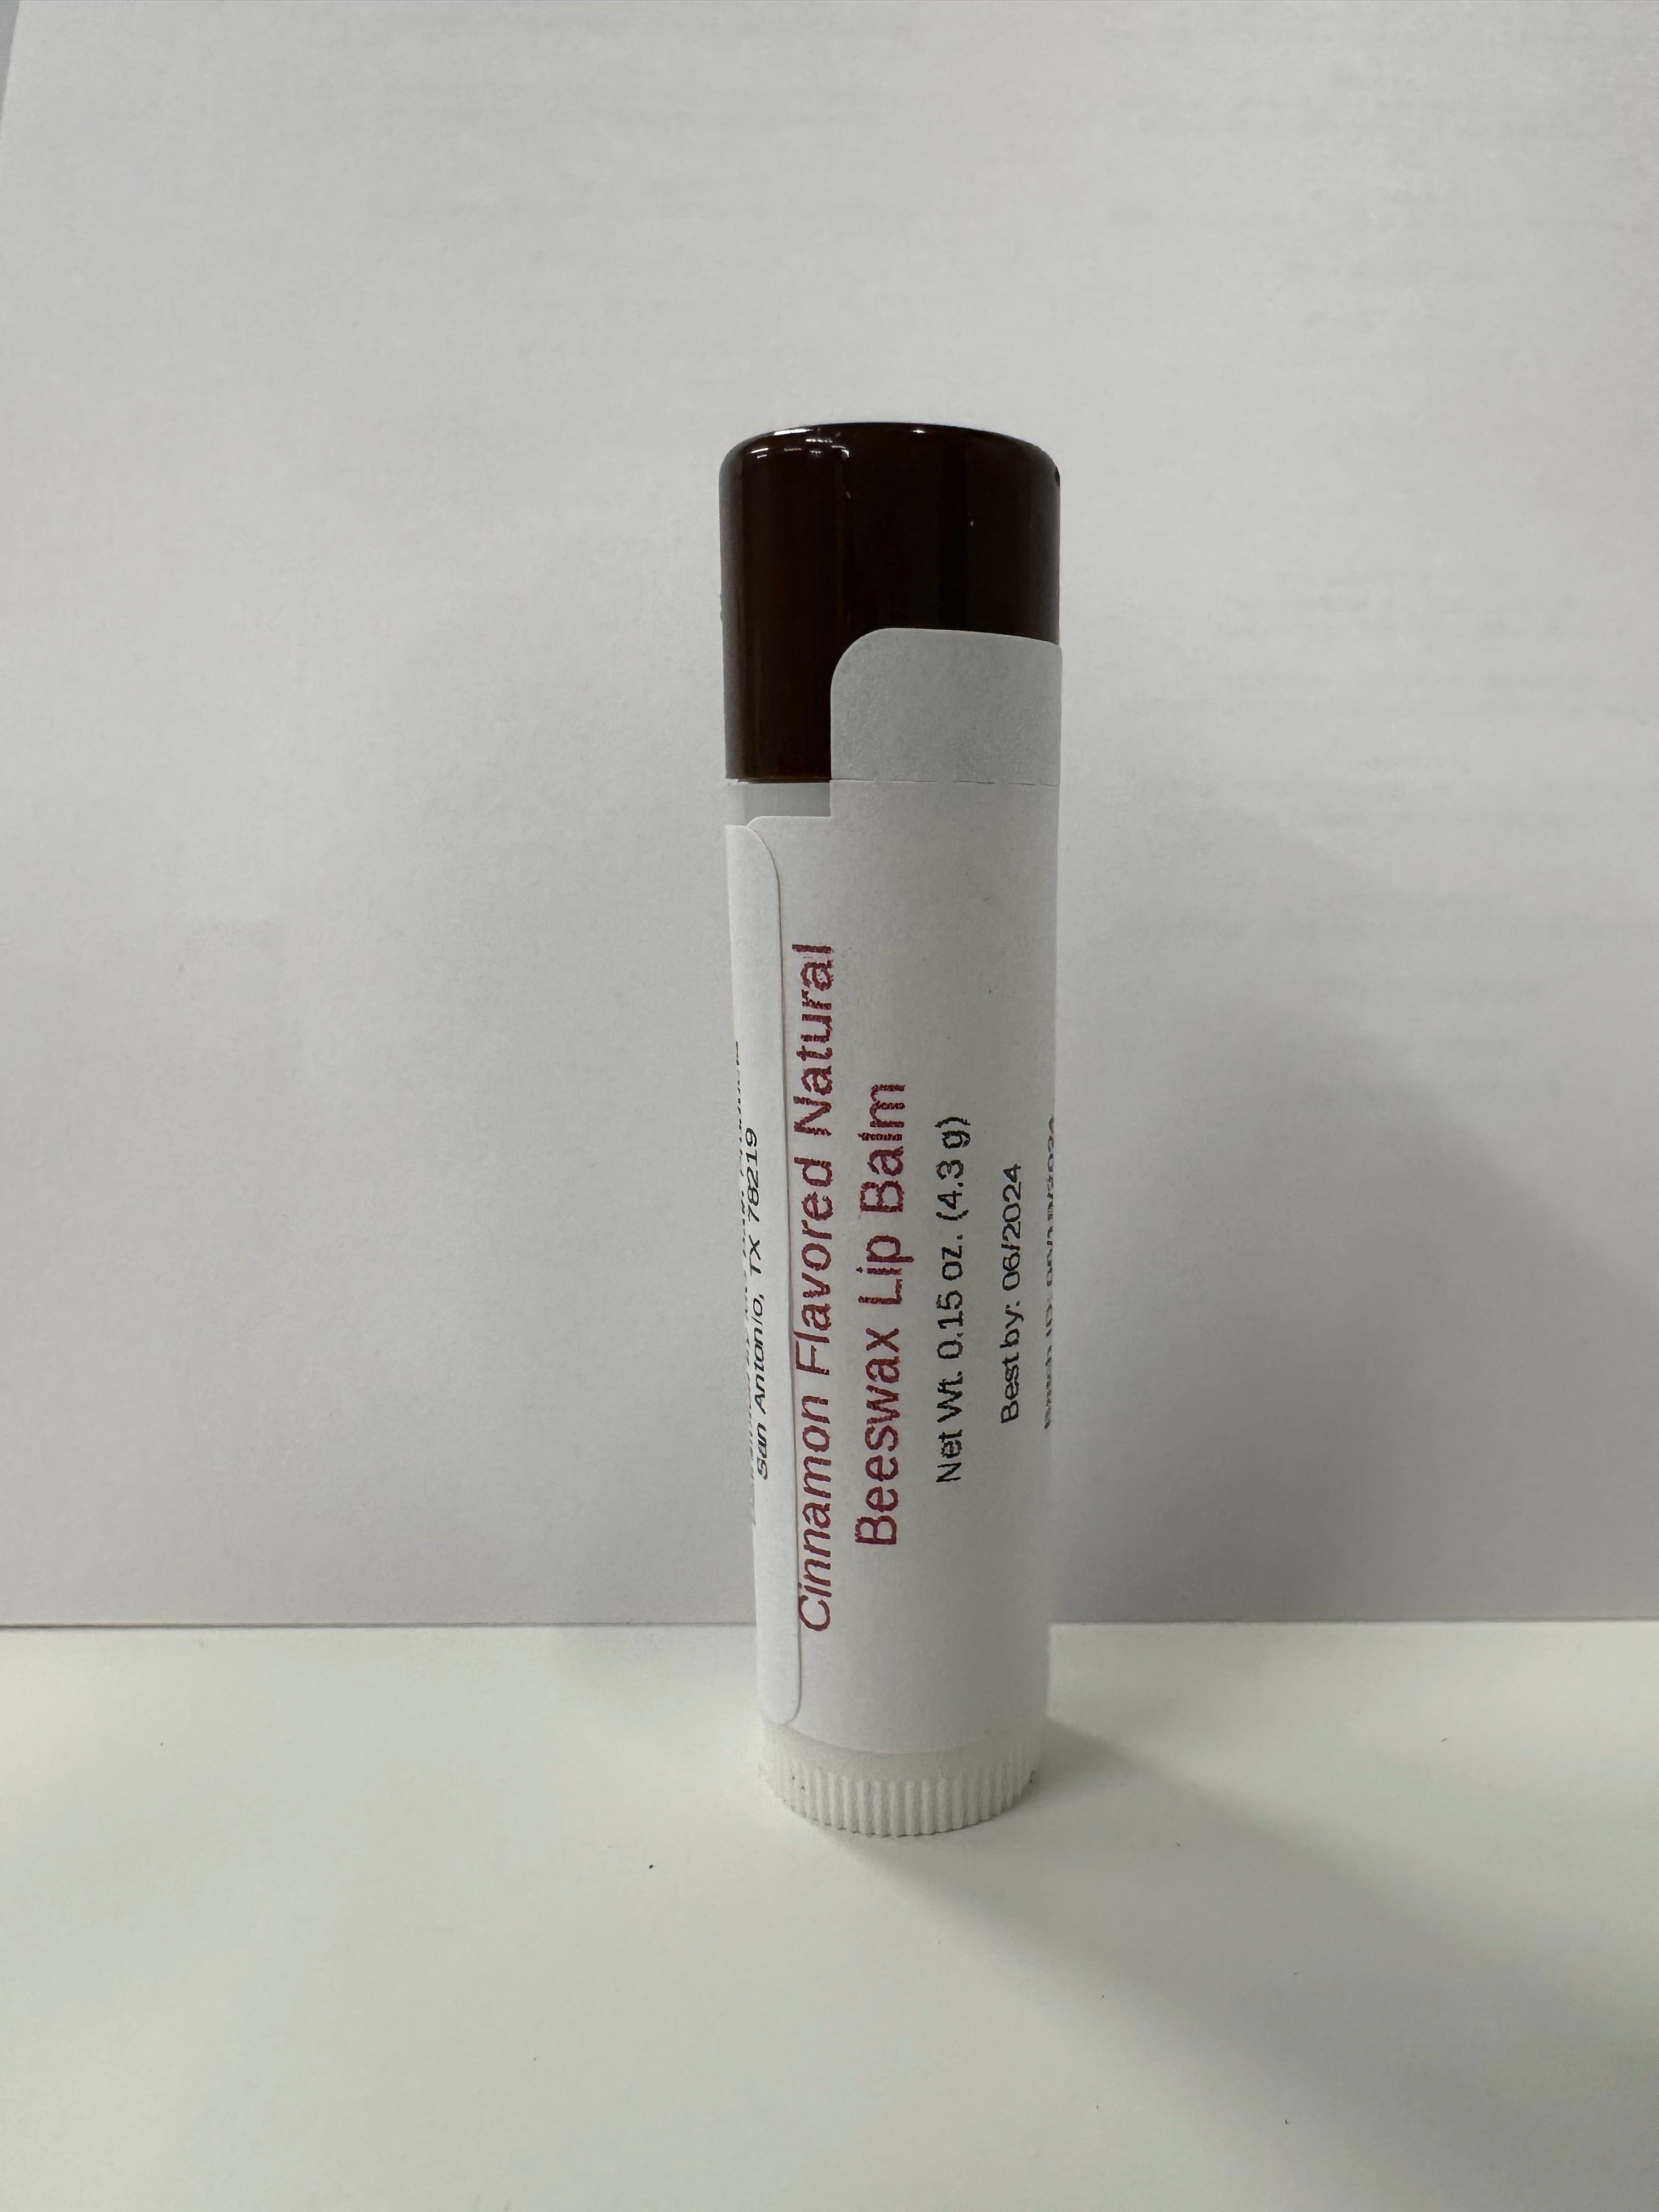 Lip balm in tube that has a brown colored cap on it.